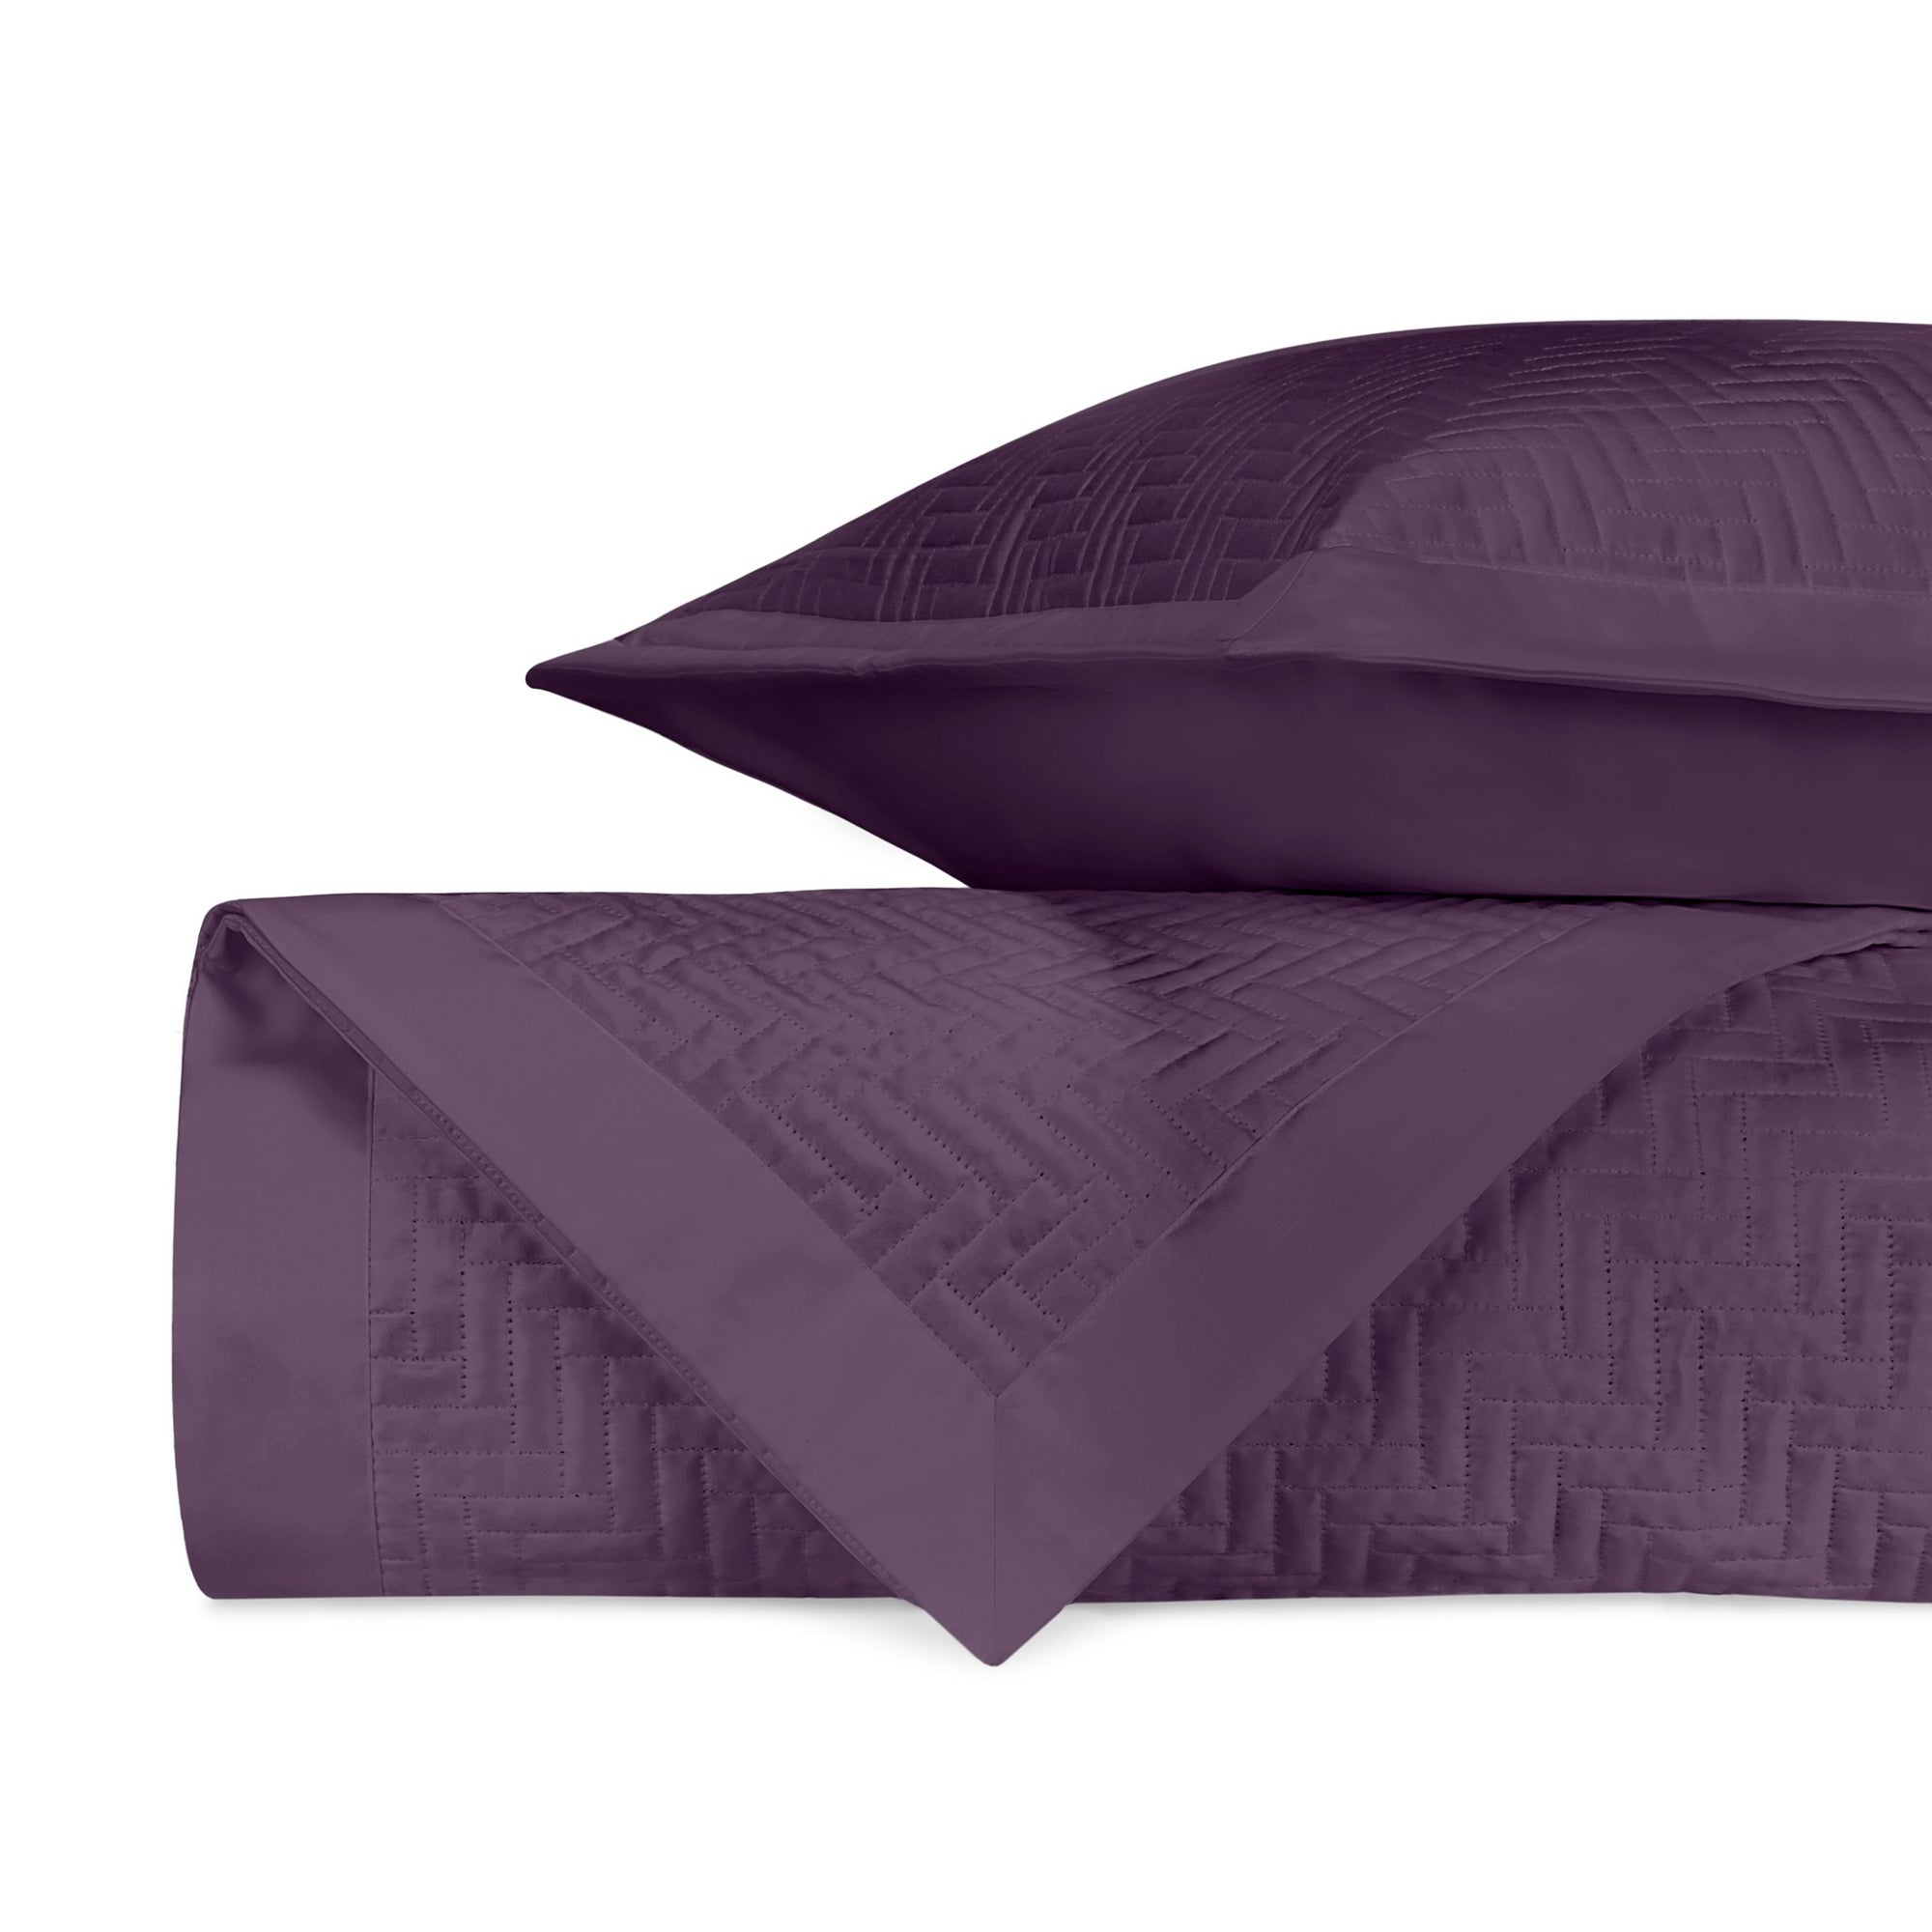 Stack Image of Home Treasures Baxter Royal Sateen Quilted Bedding in Color Purple